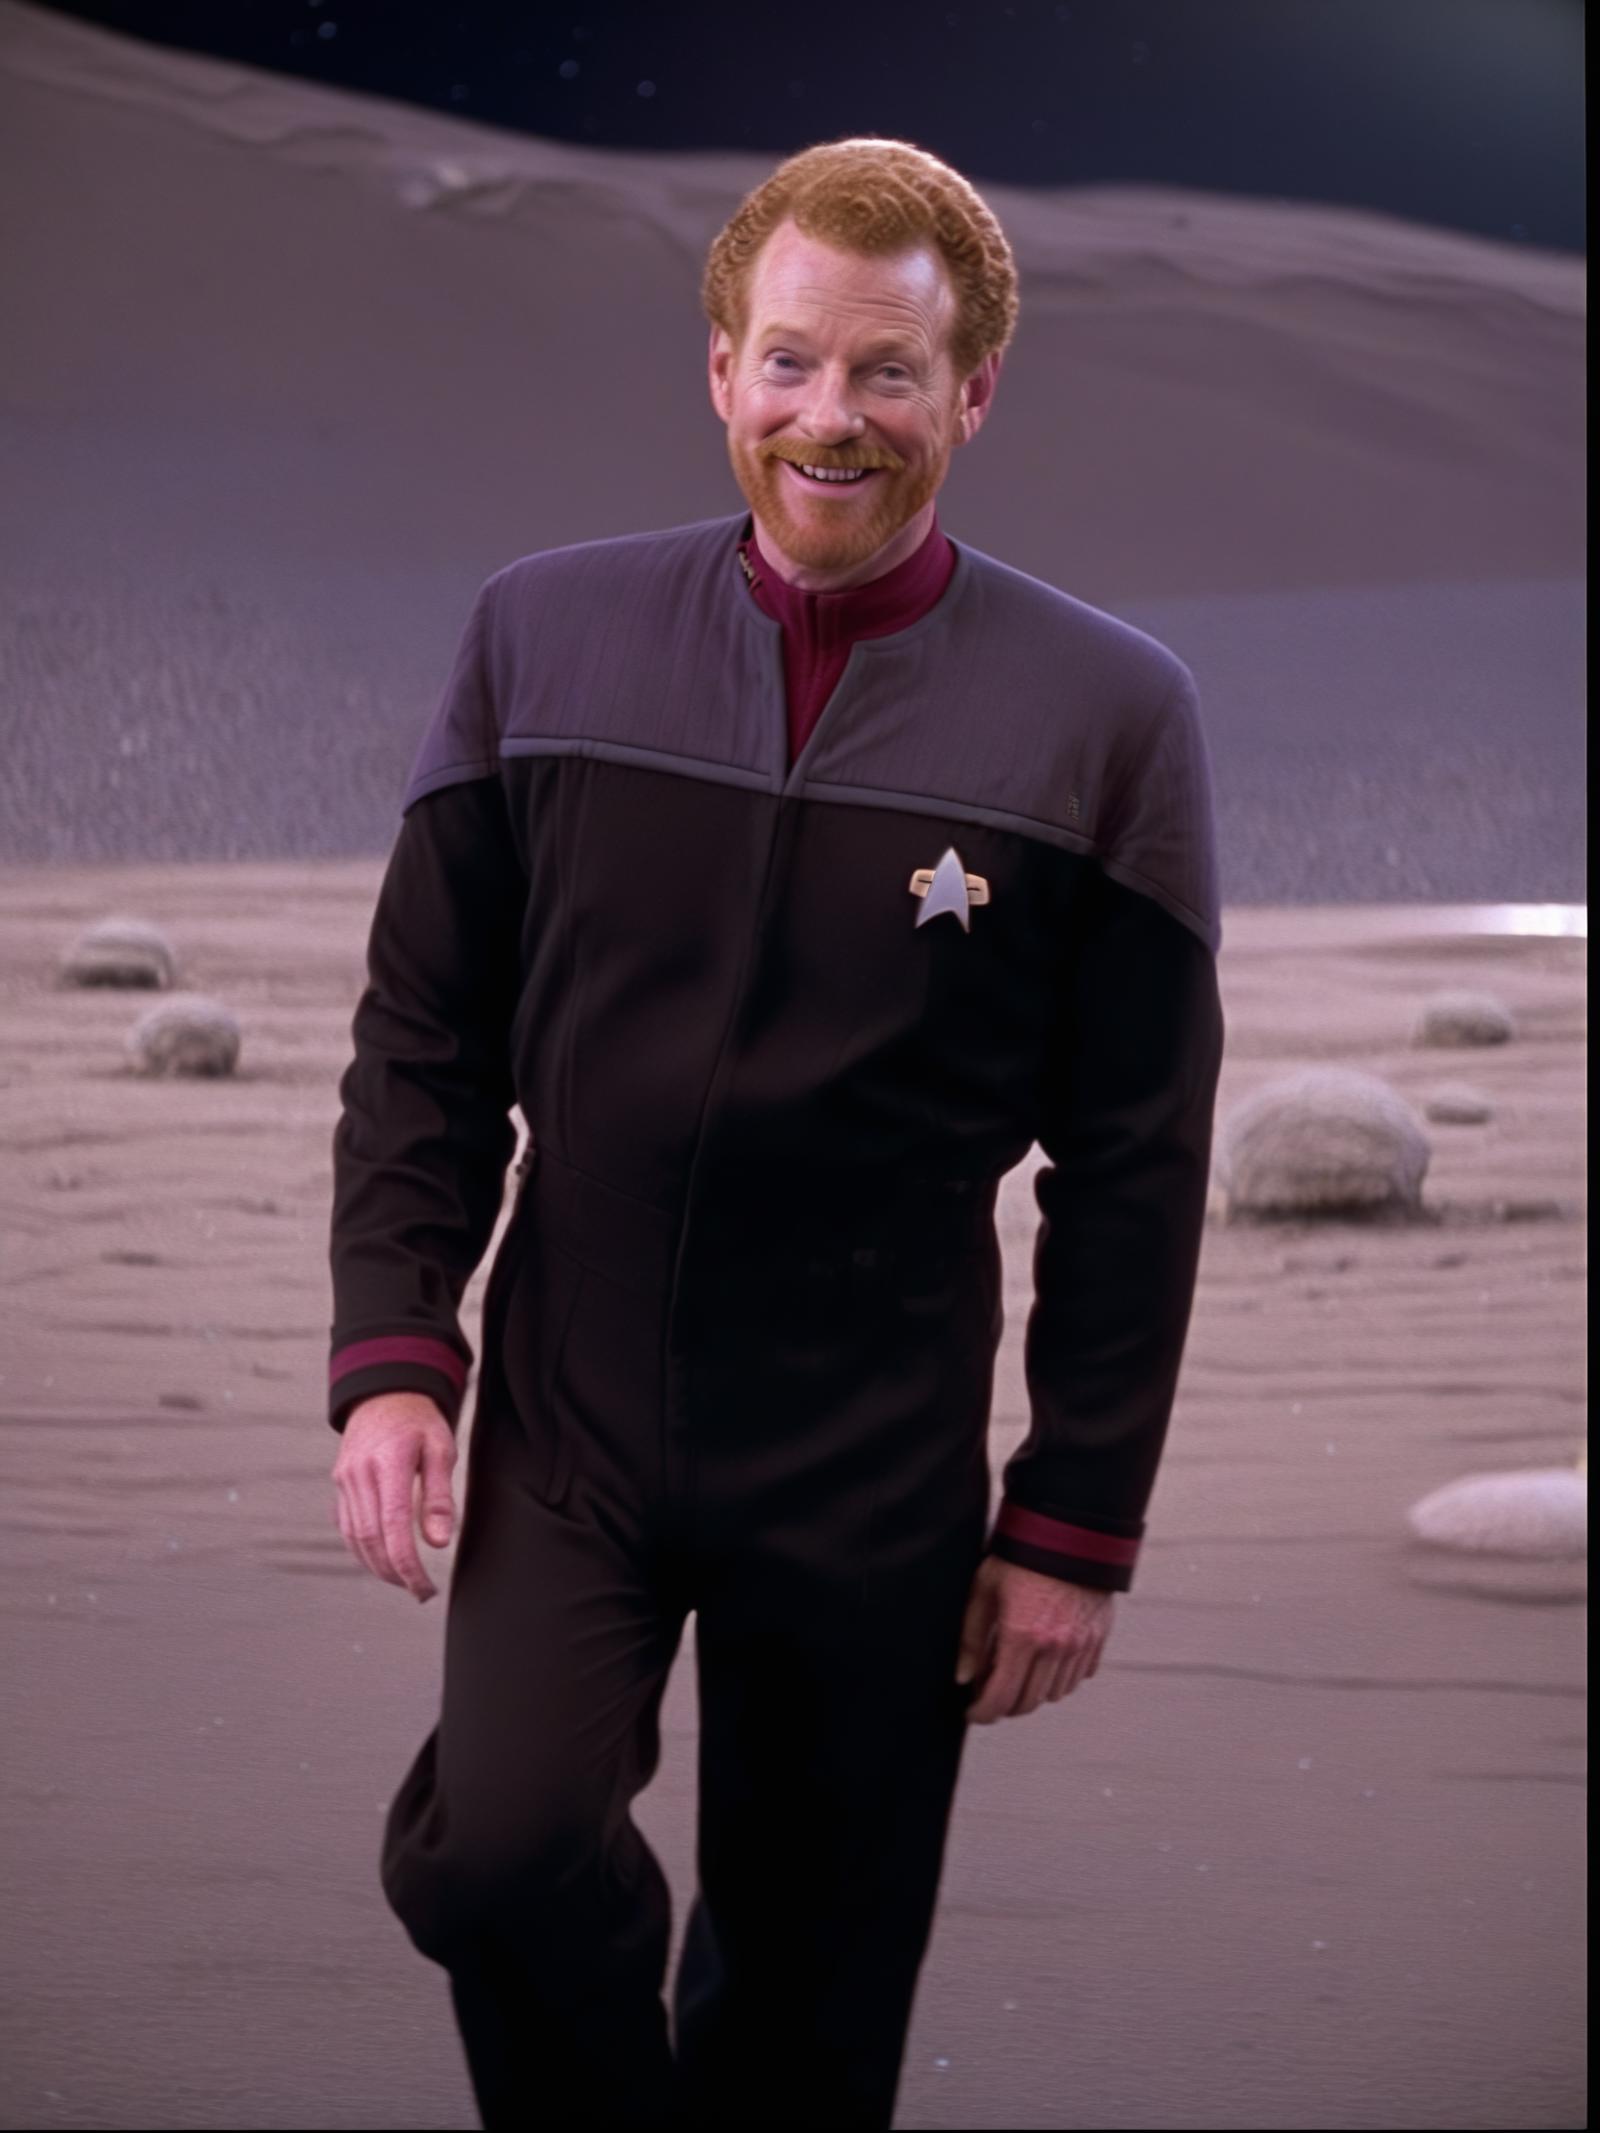 Star Trek DS9 uniforms (XL) image by impossiblebearcl4060